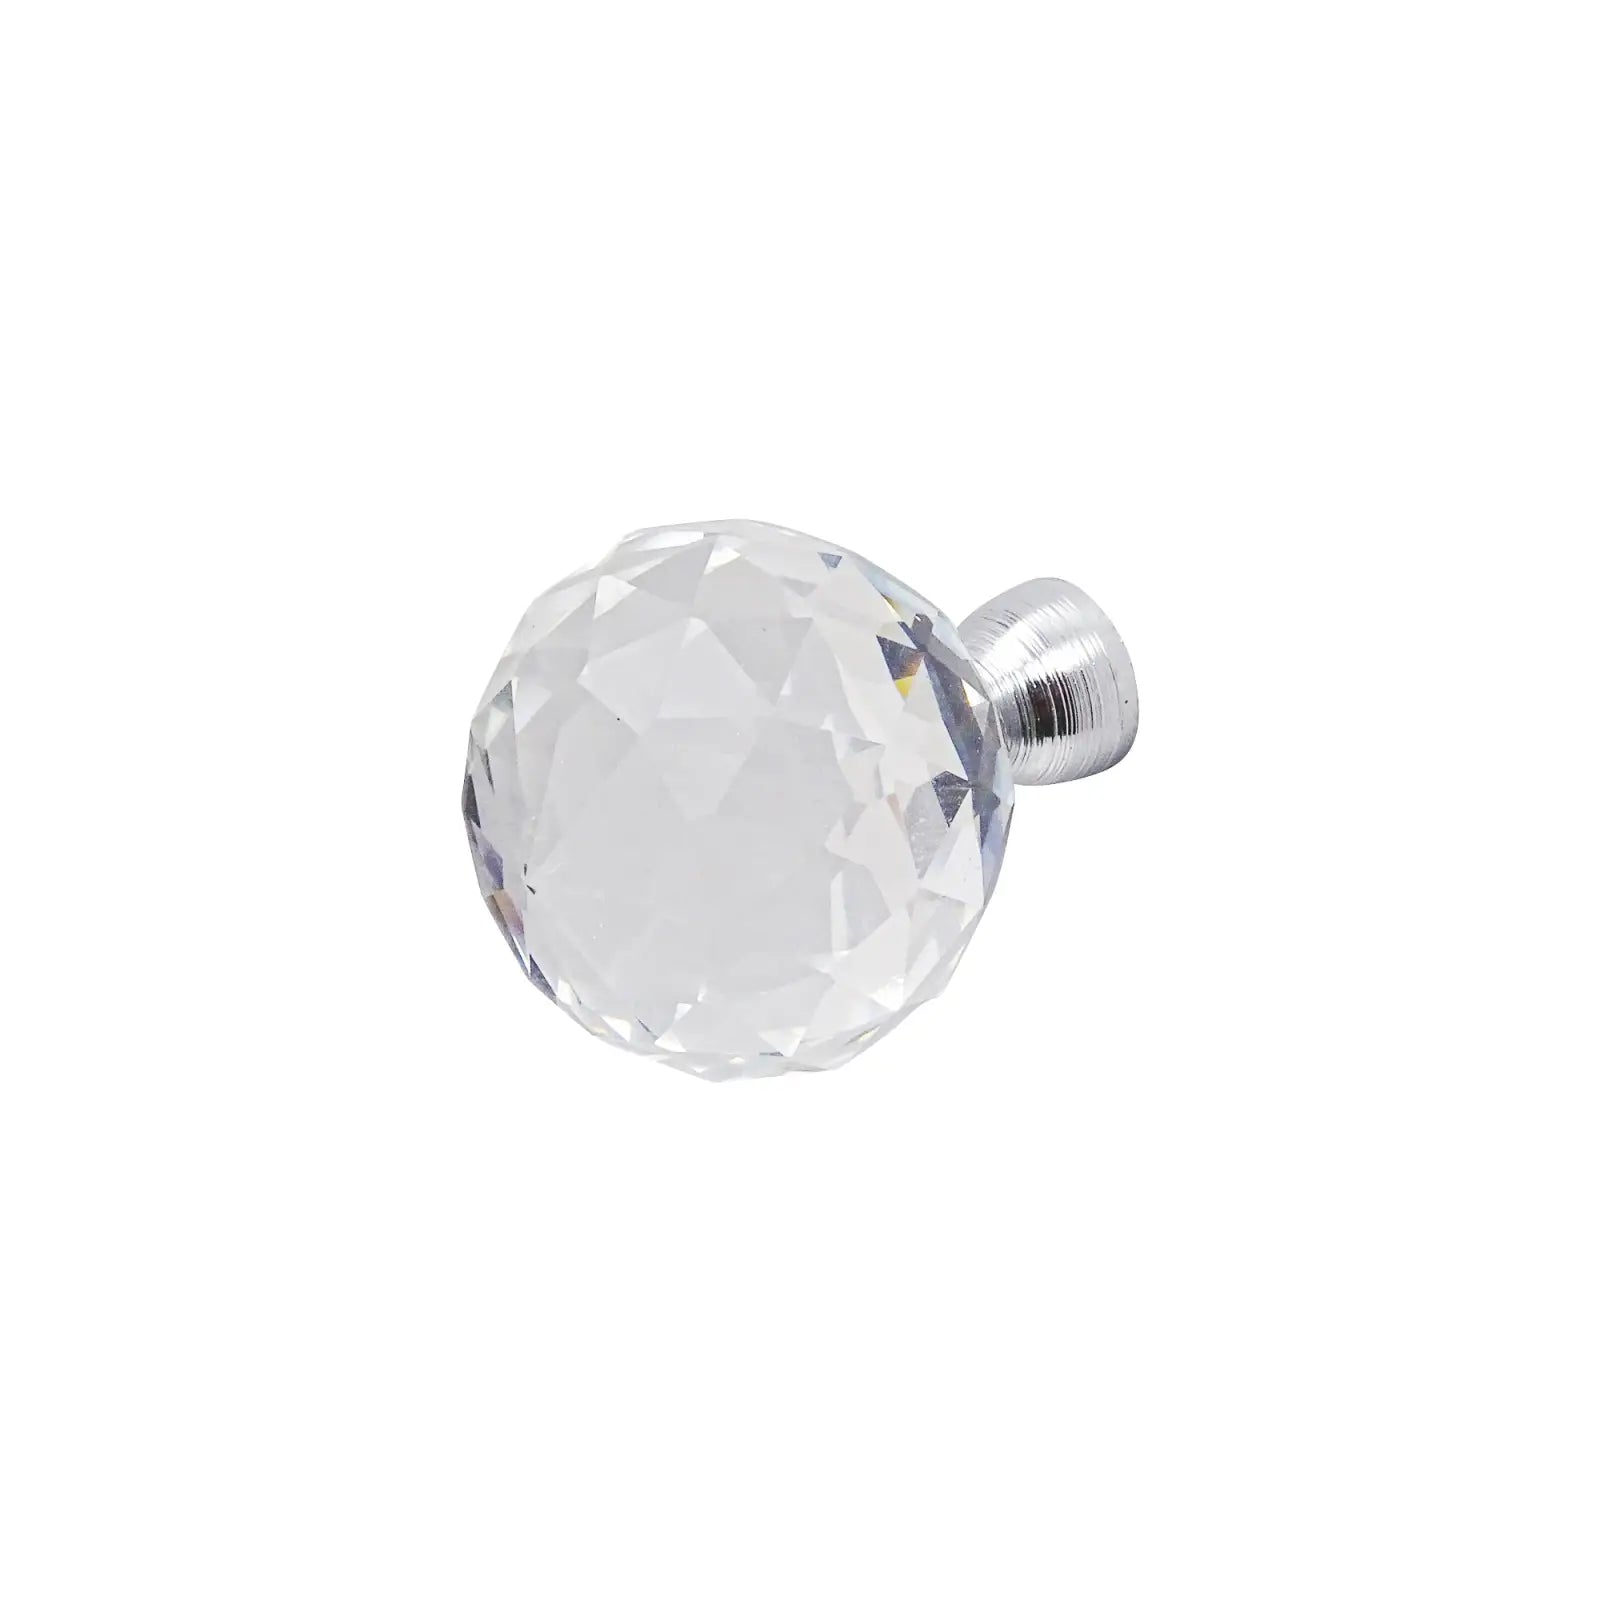 Tayberry - Round Crystal Glass Cabinet Knob - Polished Chrome - Decor And Decor